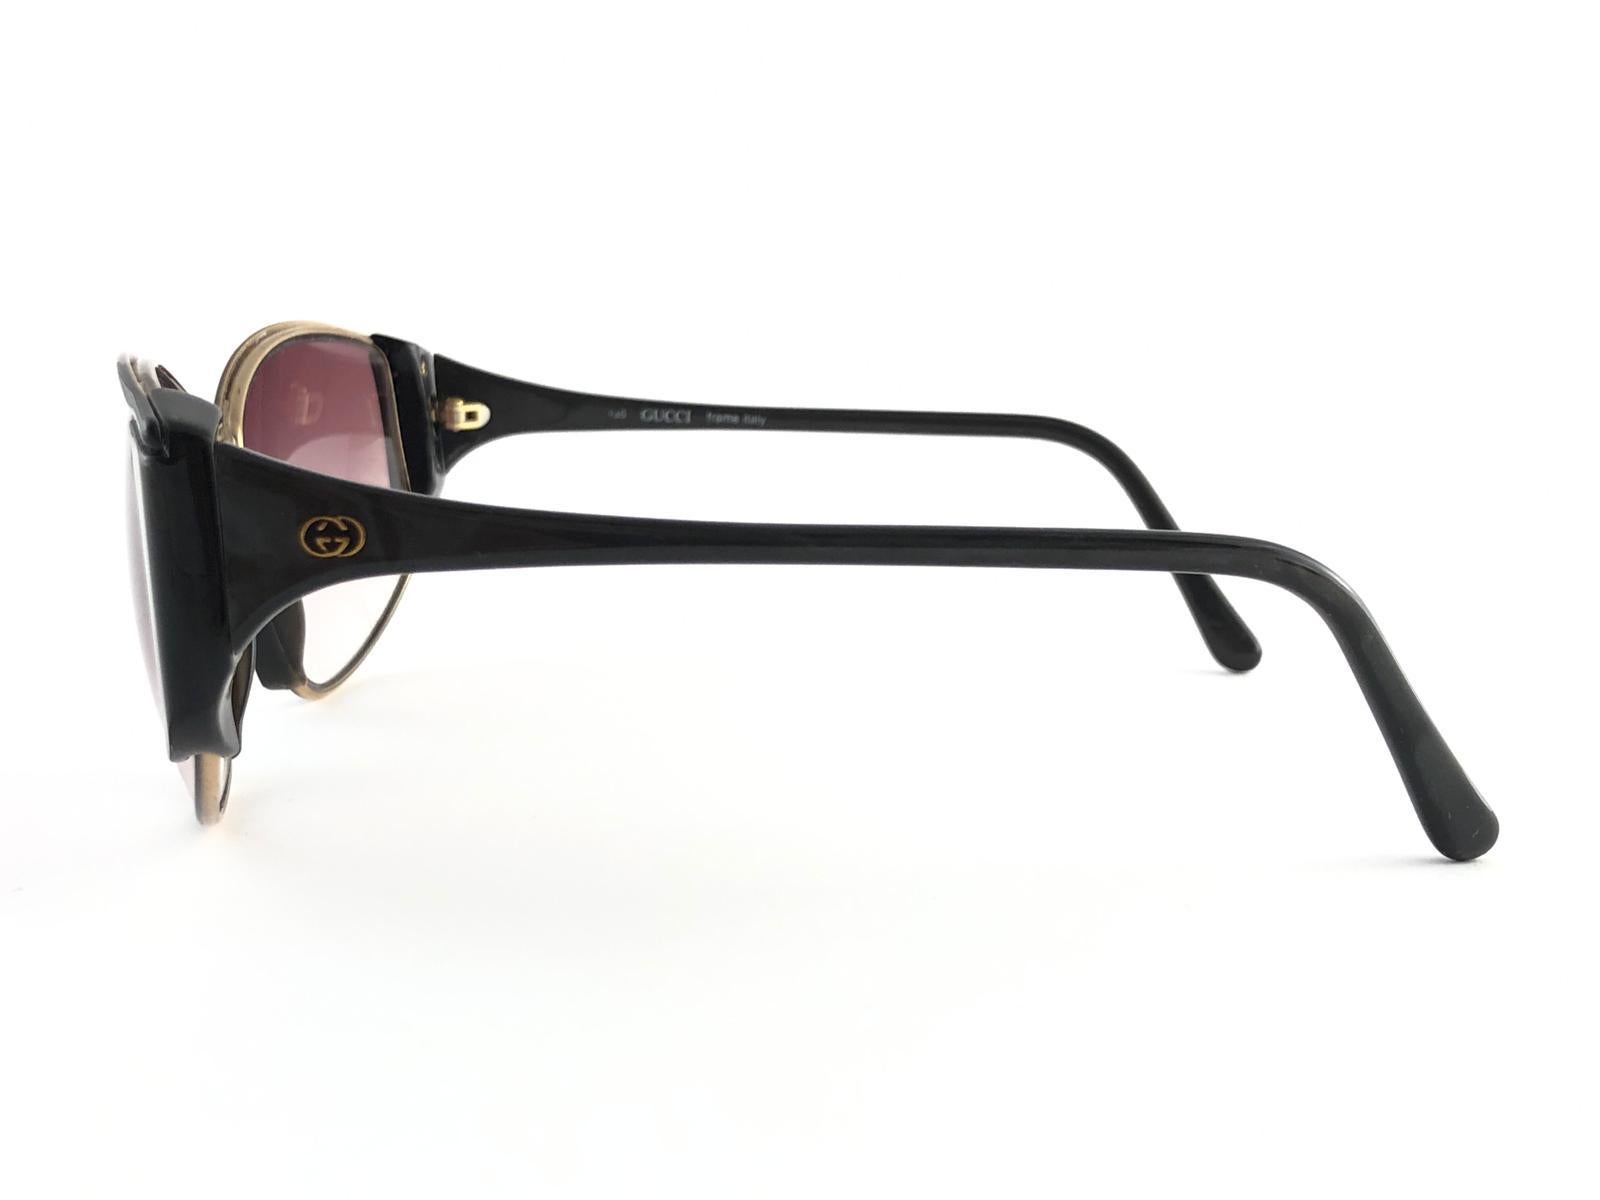 New Vintage Gucci 2308 Black Cat Eye Sunglasses 1980's Made in Italy For Sale 1